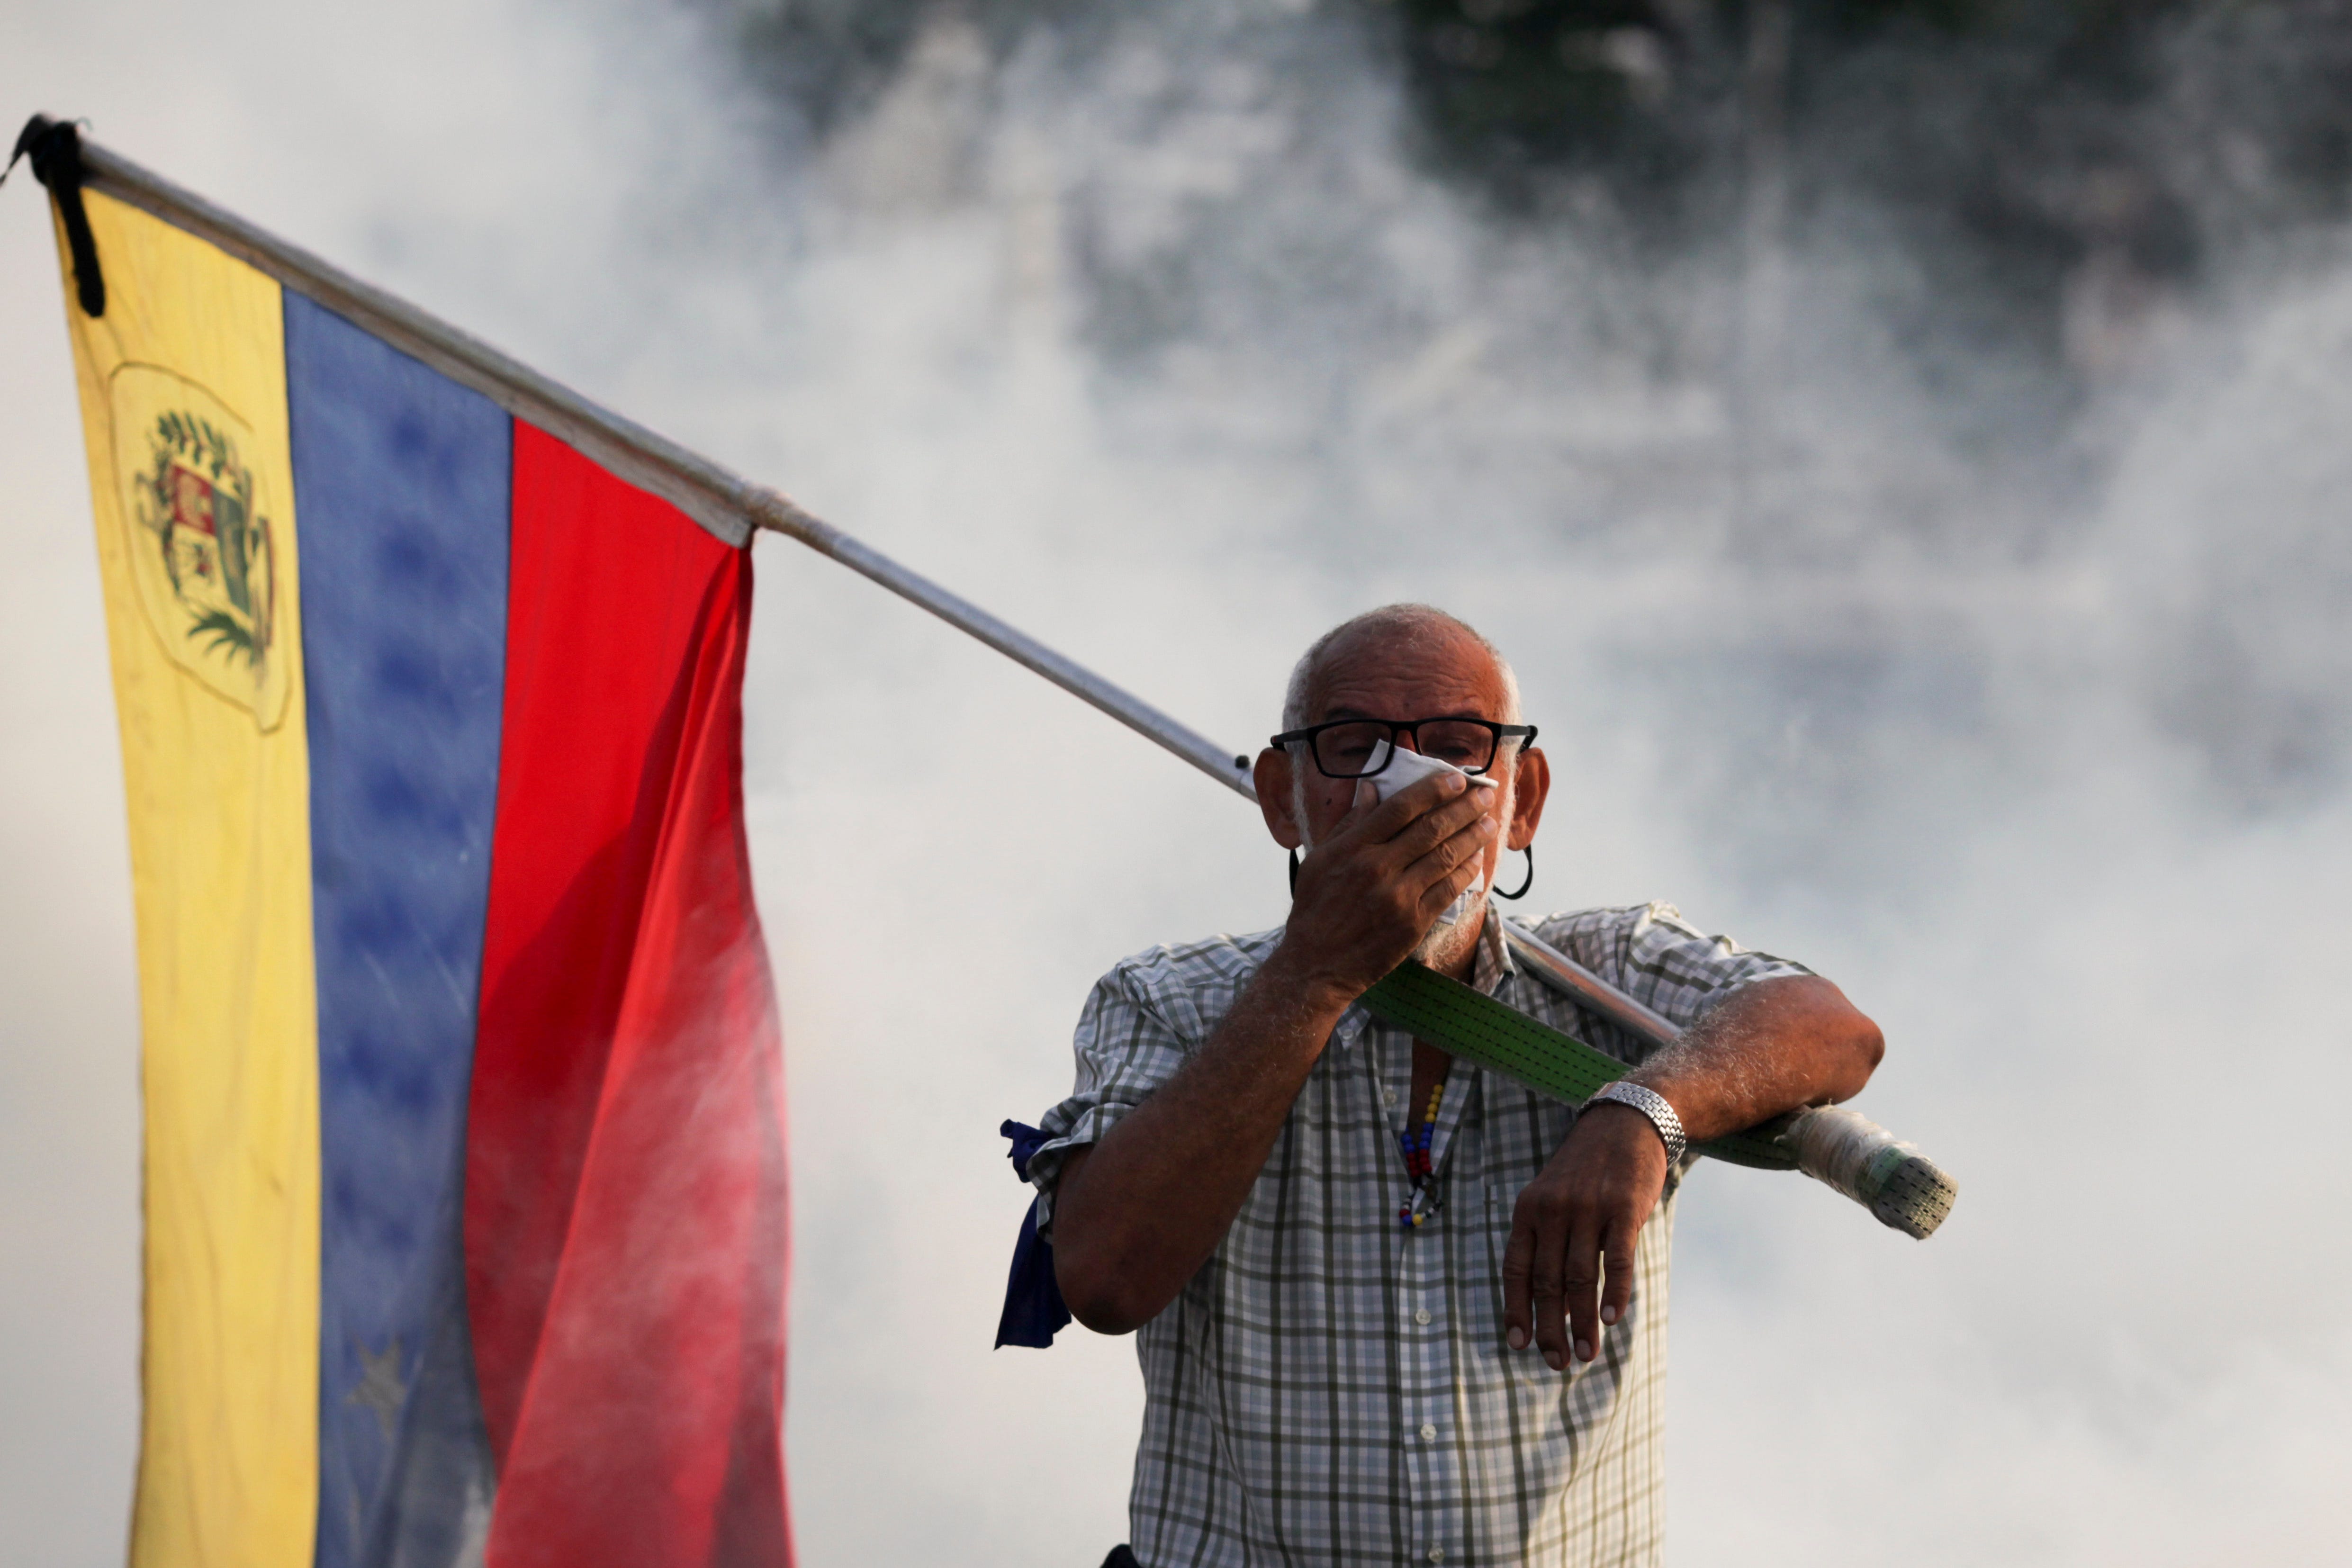 An opponent to Venezuelan President Nicolas Maduro carrying a Venezuelan flag covers his face amid tear gas fired by soldiers loyal to Maduro during an attempted military uprising to oust Maduro in Caracas, Venezuela, Tuesday, April 30, 2019. Venezuelan opposition leader Juan GuaidÃ³ and jailed opposition leader Leopoldo Lopez took to the streets with a small contingent of armed troops early Tuesday in a call for the military to rise up and oust Maduro.